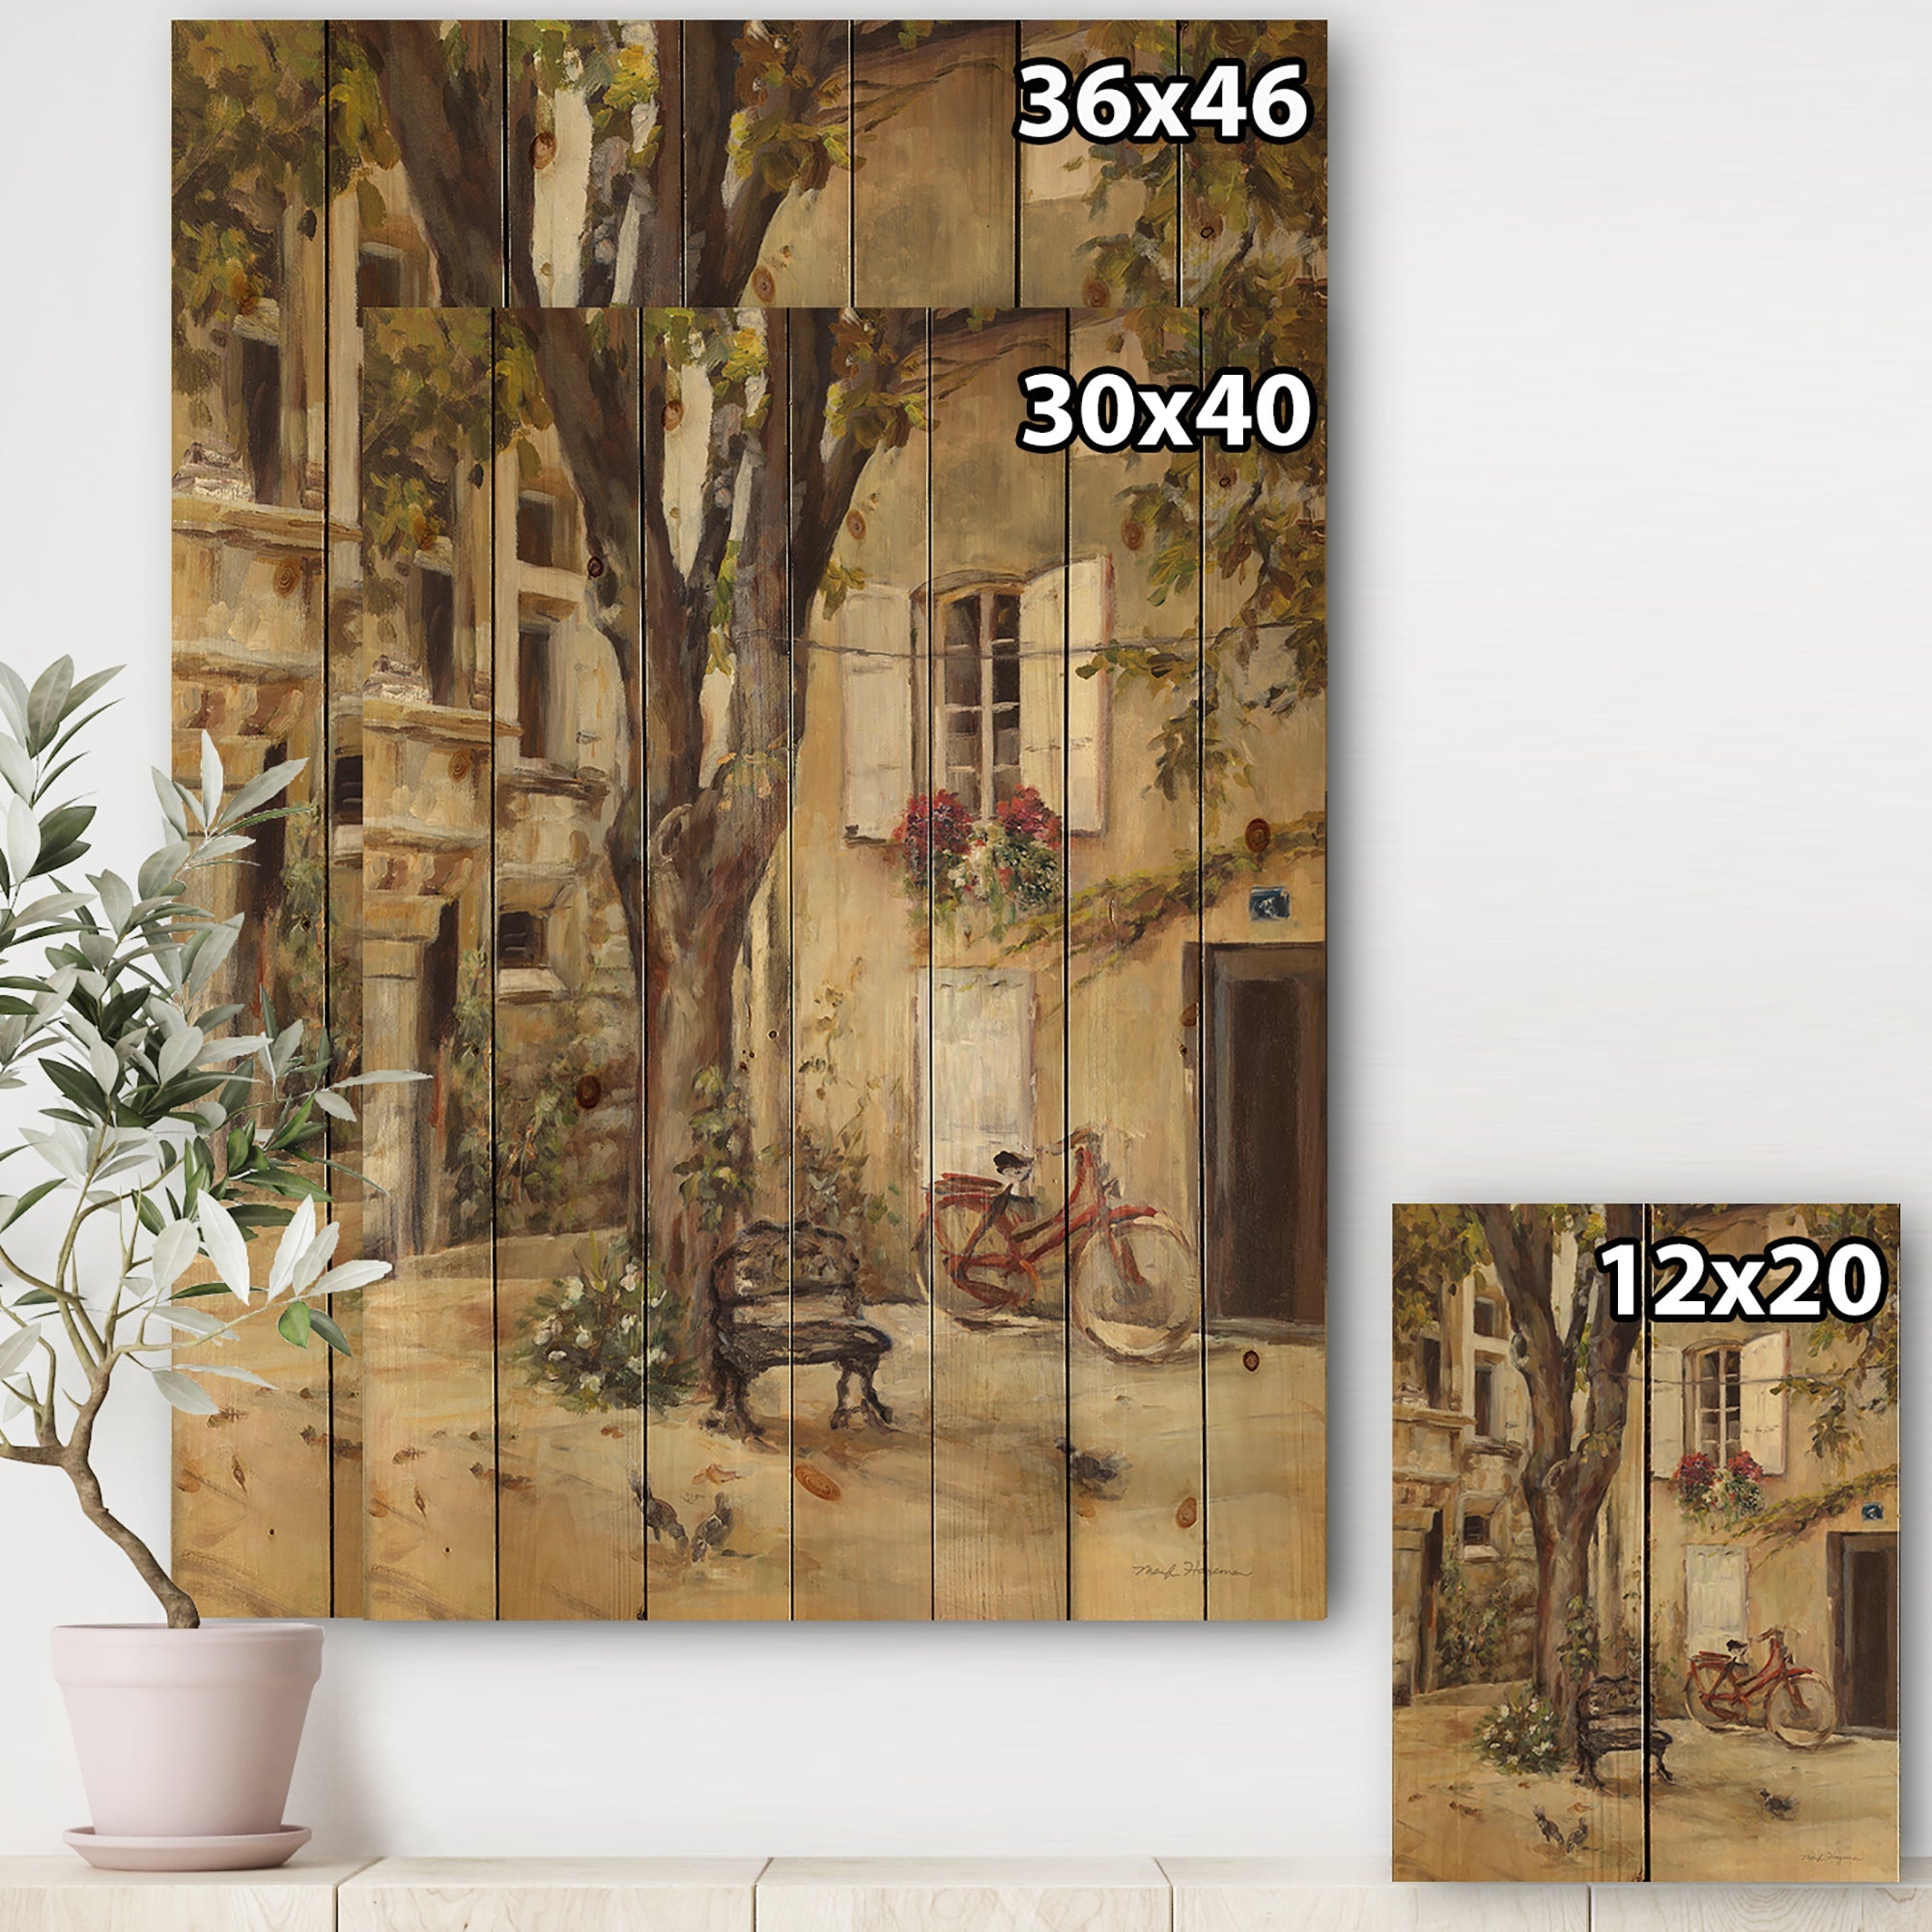 Provence French Village I - French Country Print on Natural Pine Wood - 15x20